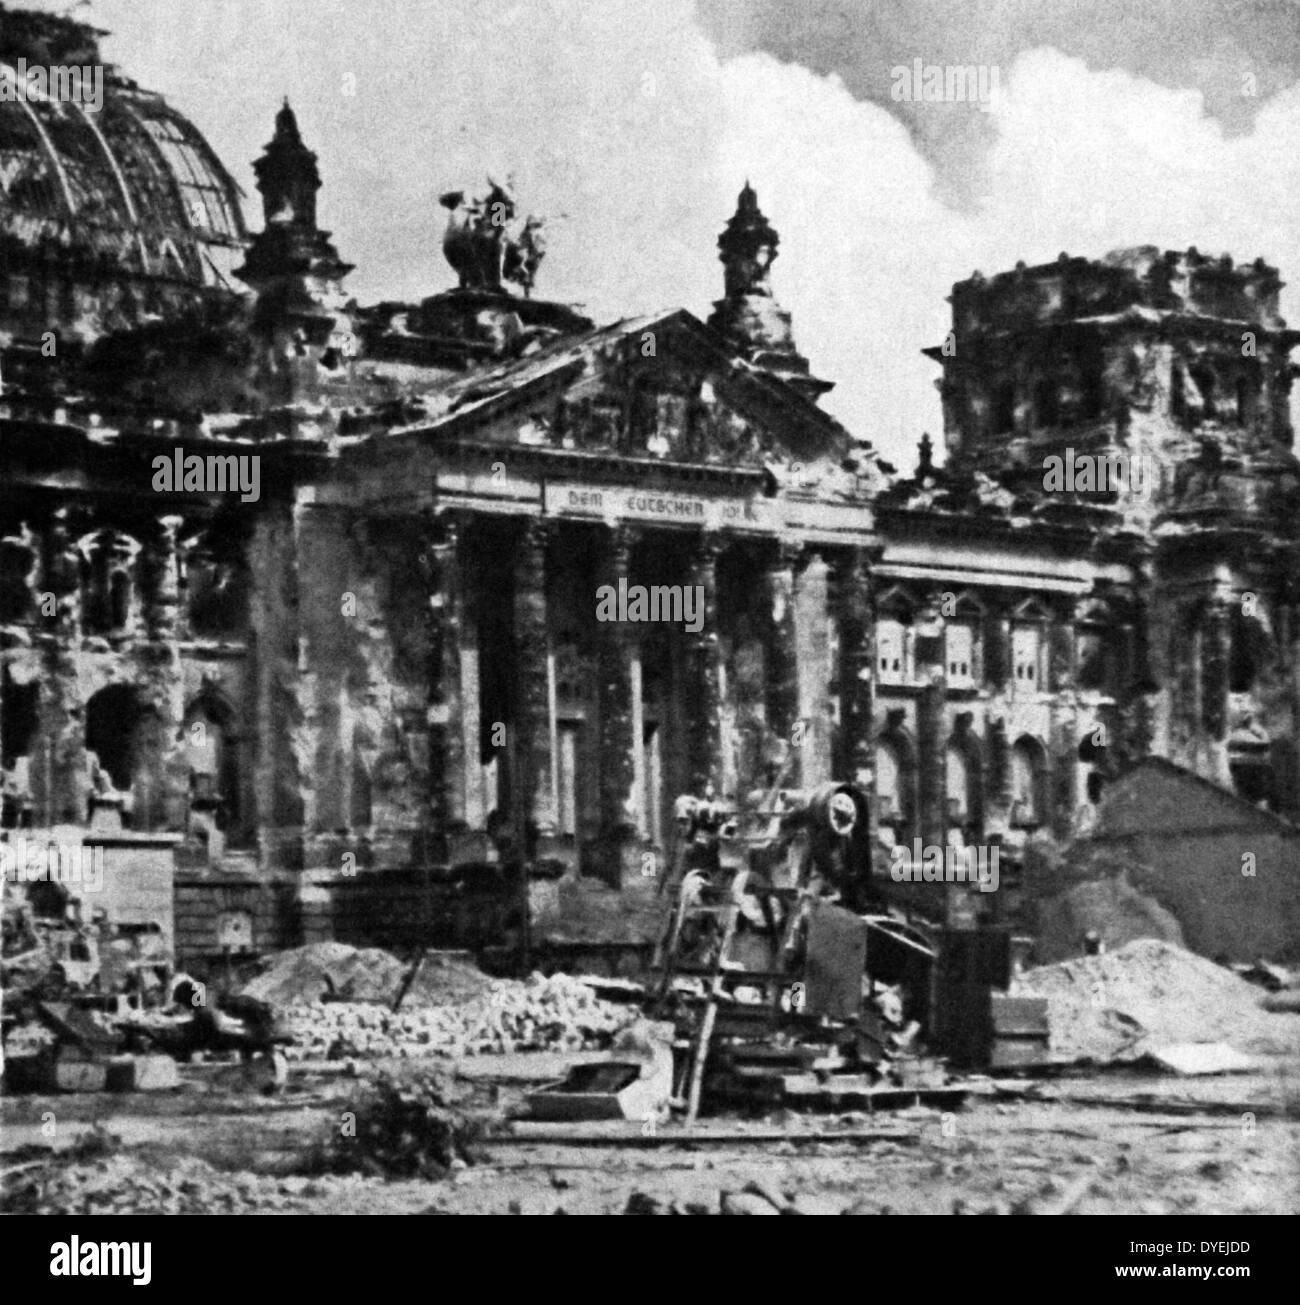 The ruins of the Reichstag after allied and Soviet forces entered Berlin, germany in May 1945 Stock Photo